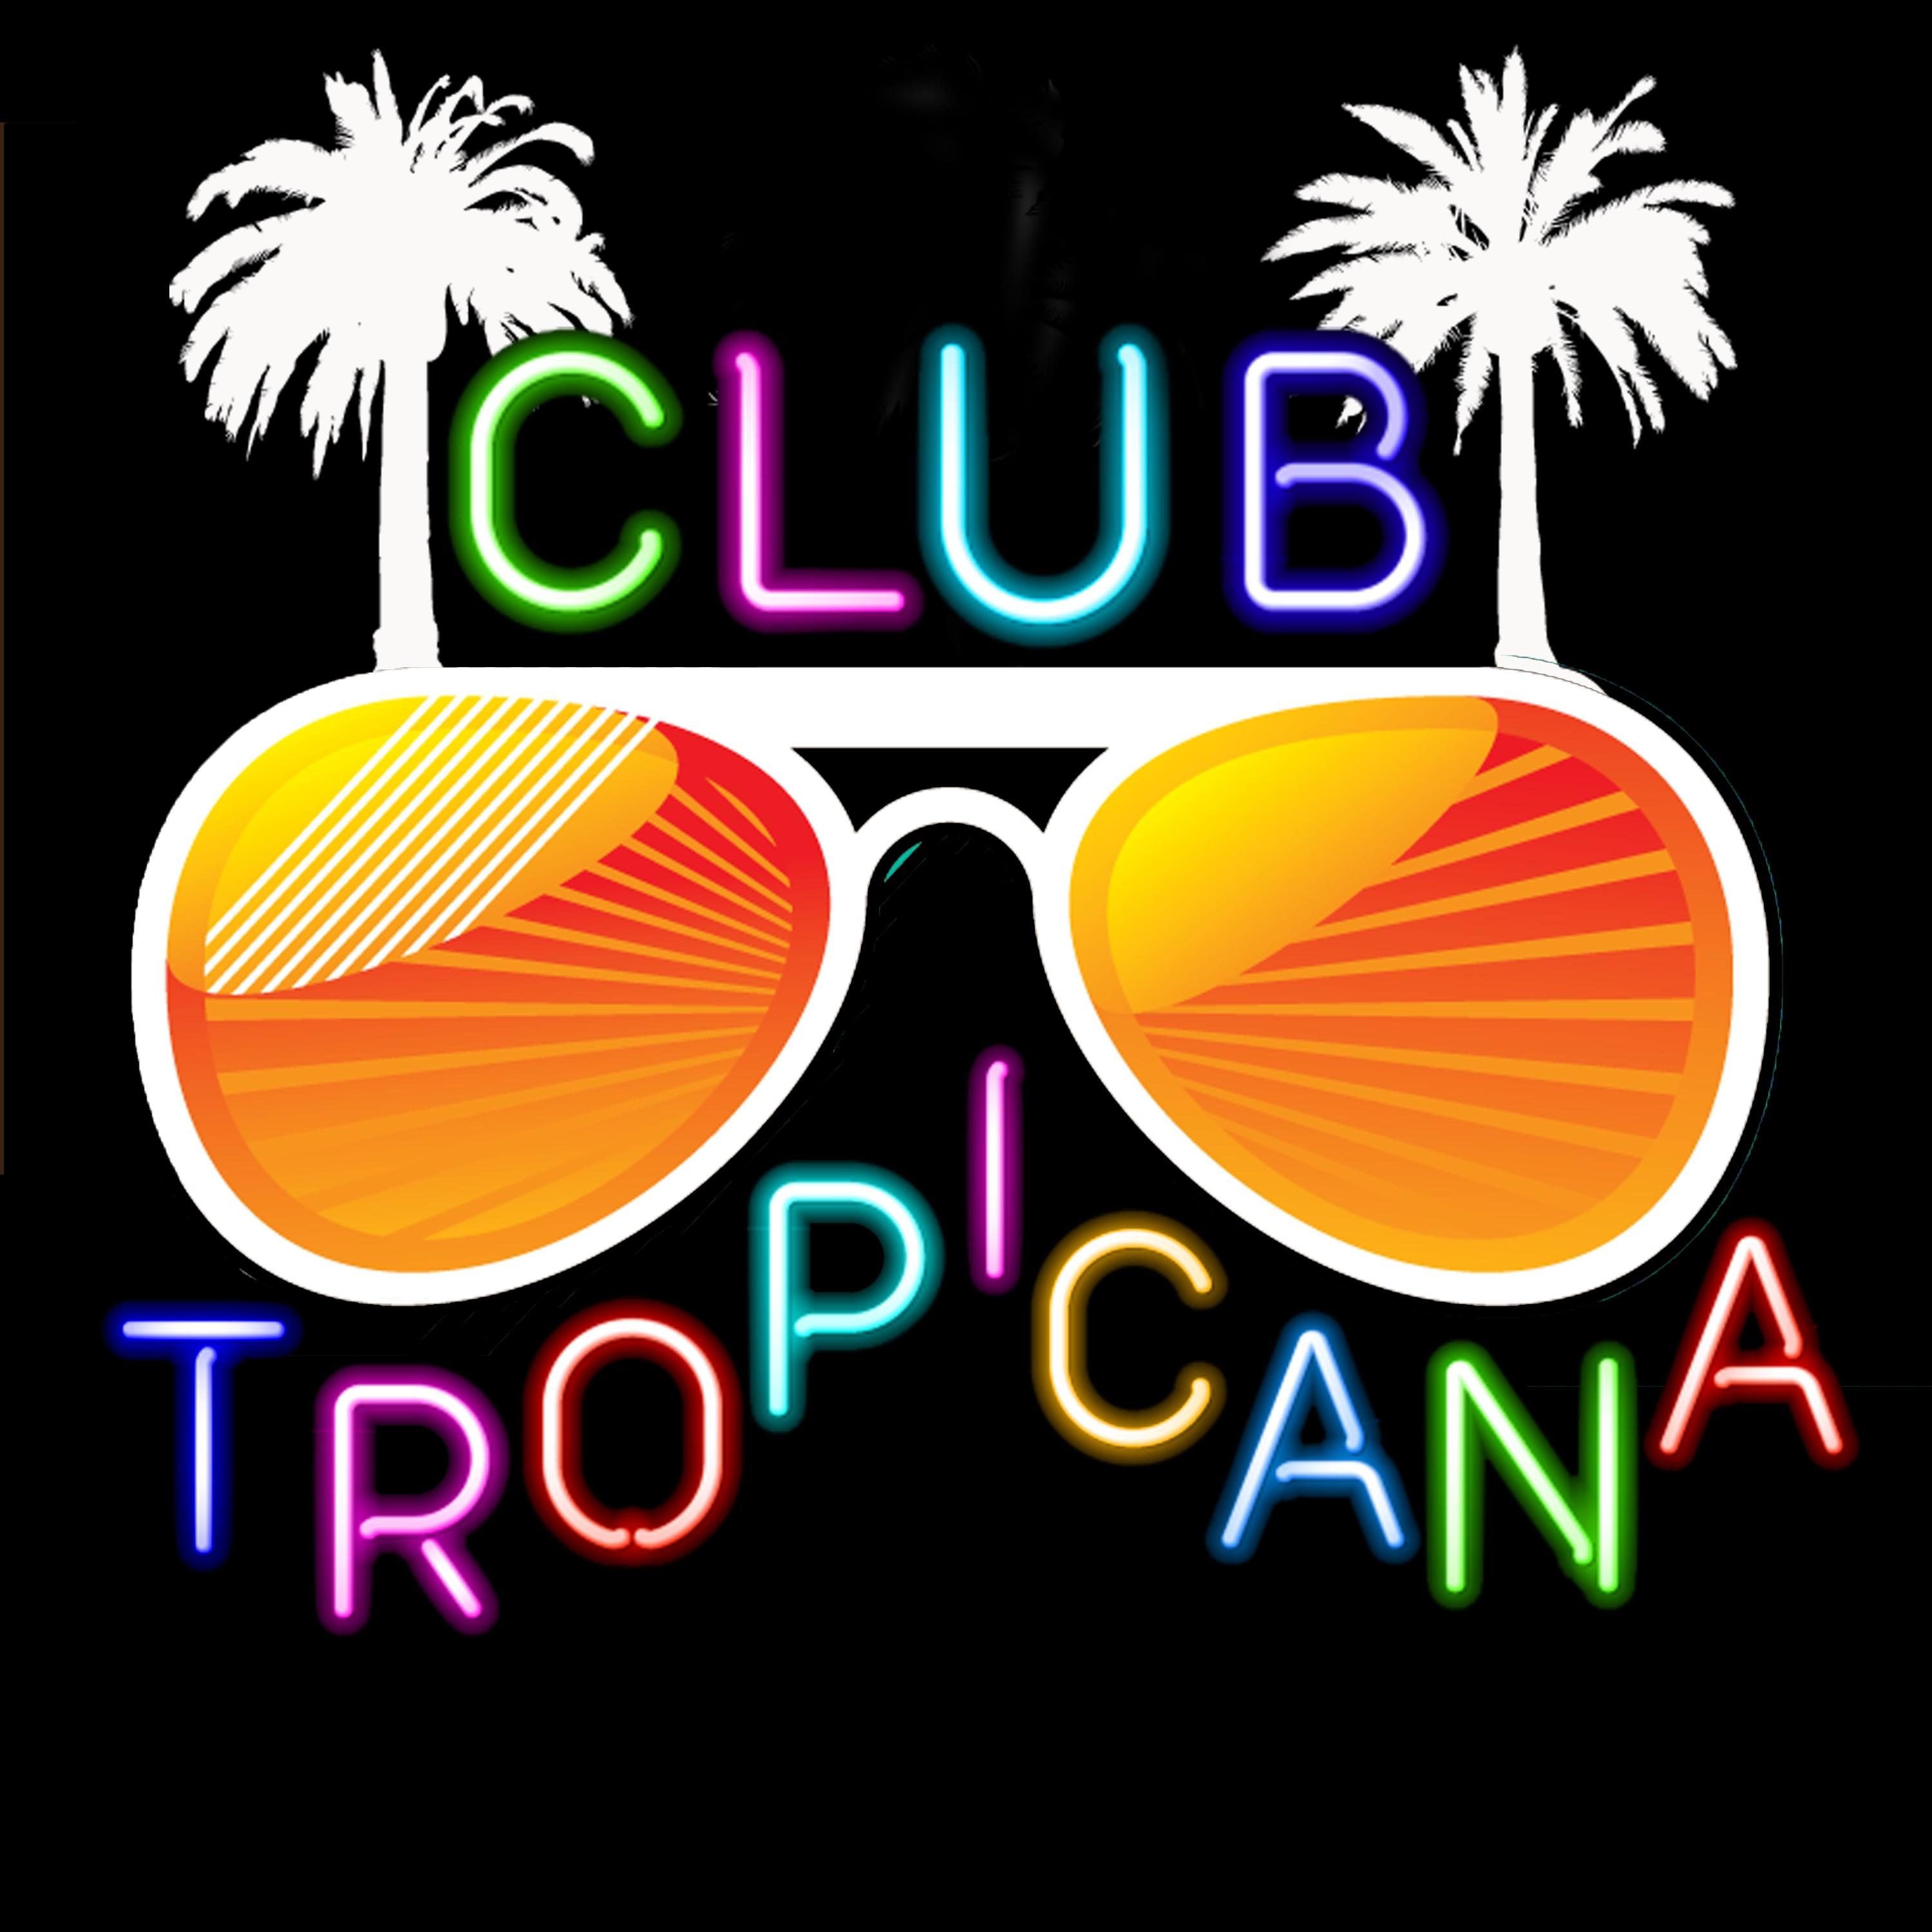 Club Tropicana: A Night to Remember